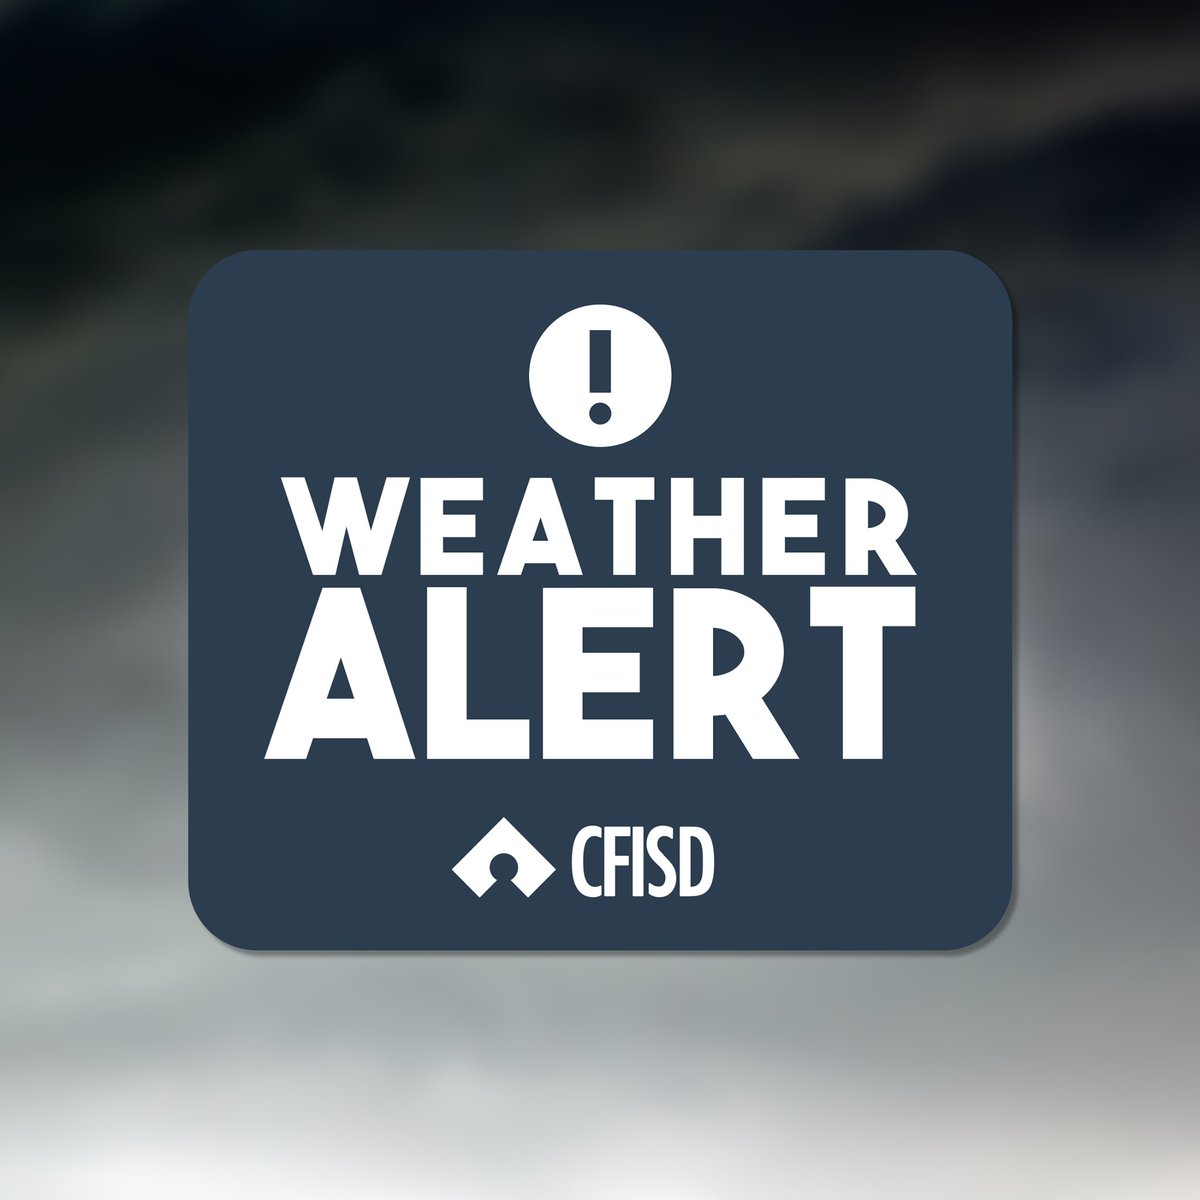 We are continuing to monitor the weather in our area. Please stay tuned for updates via the website, social media and email.